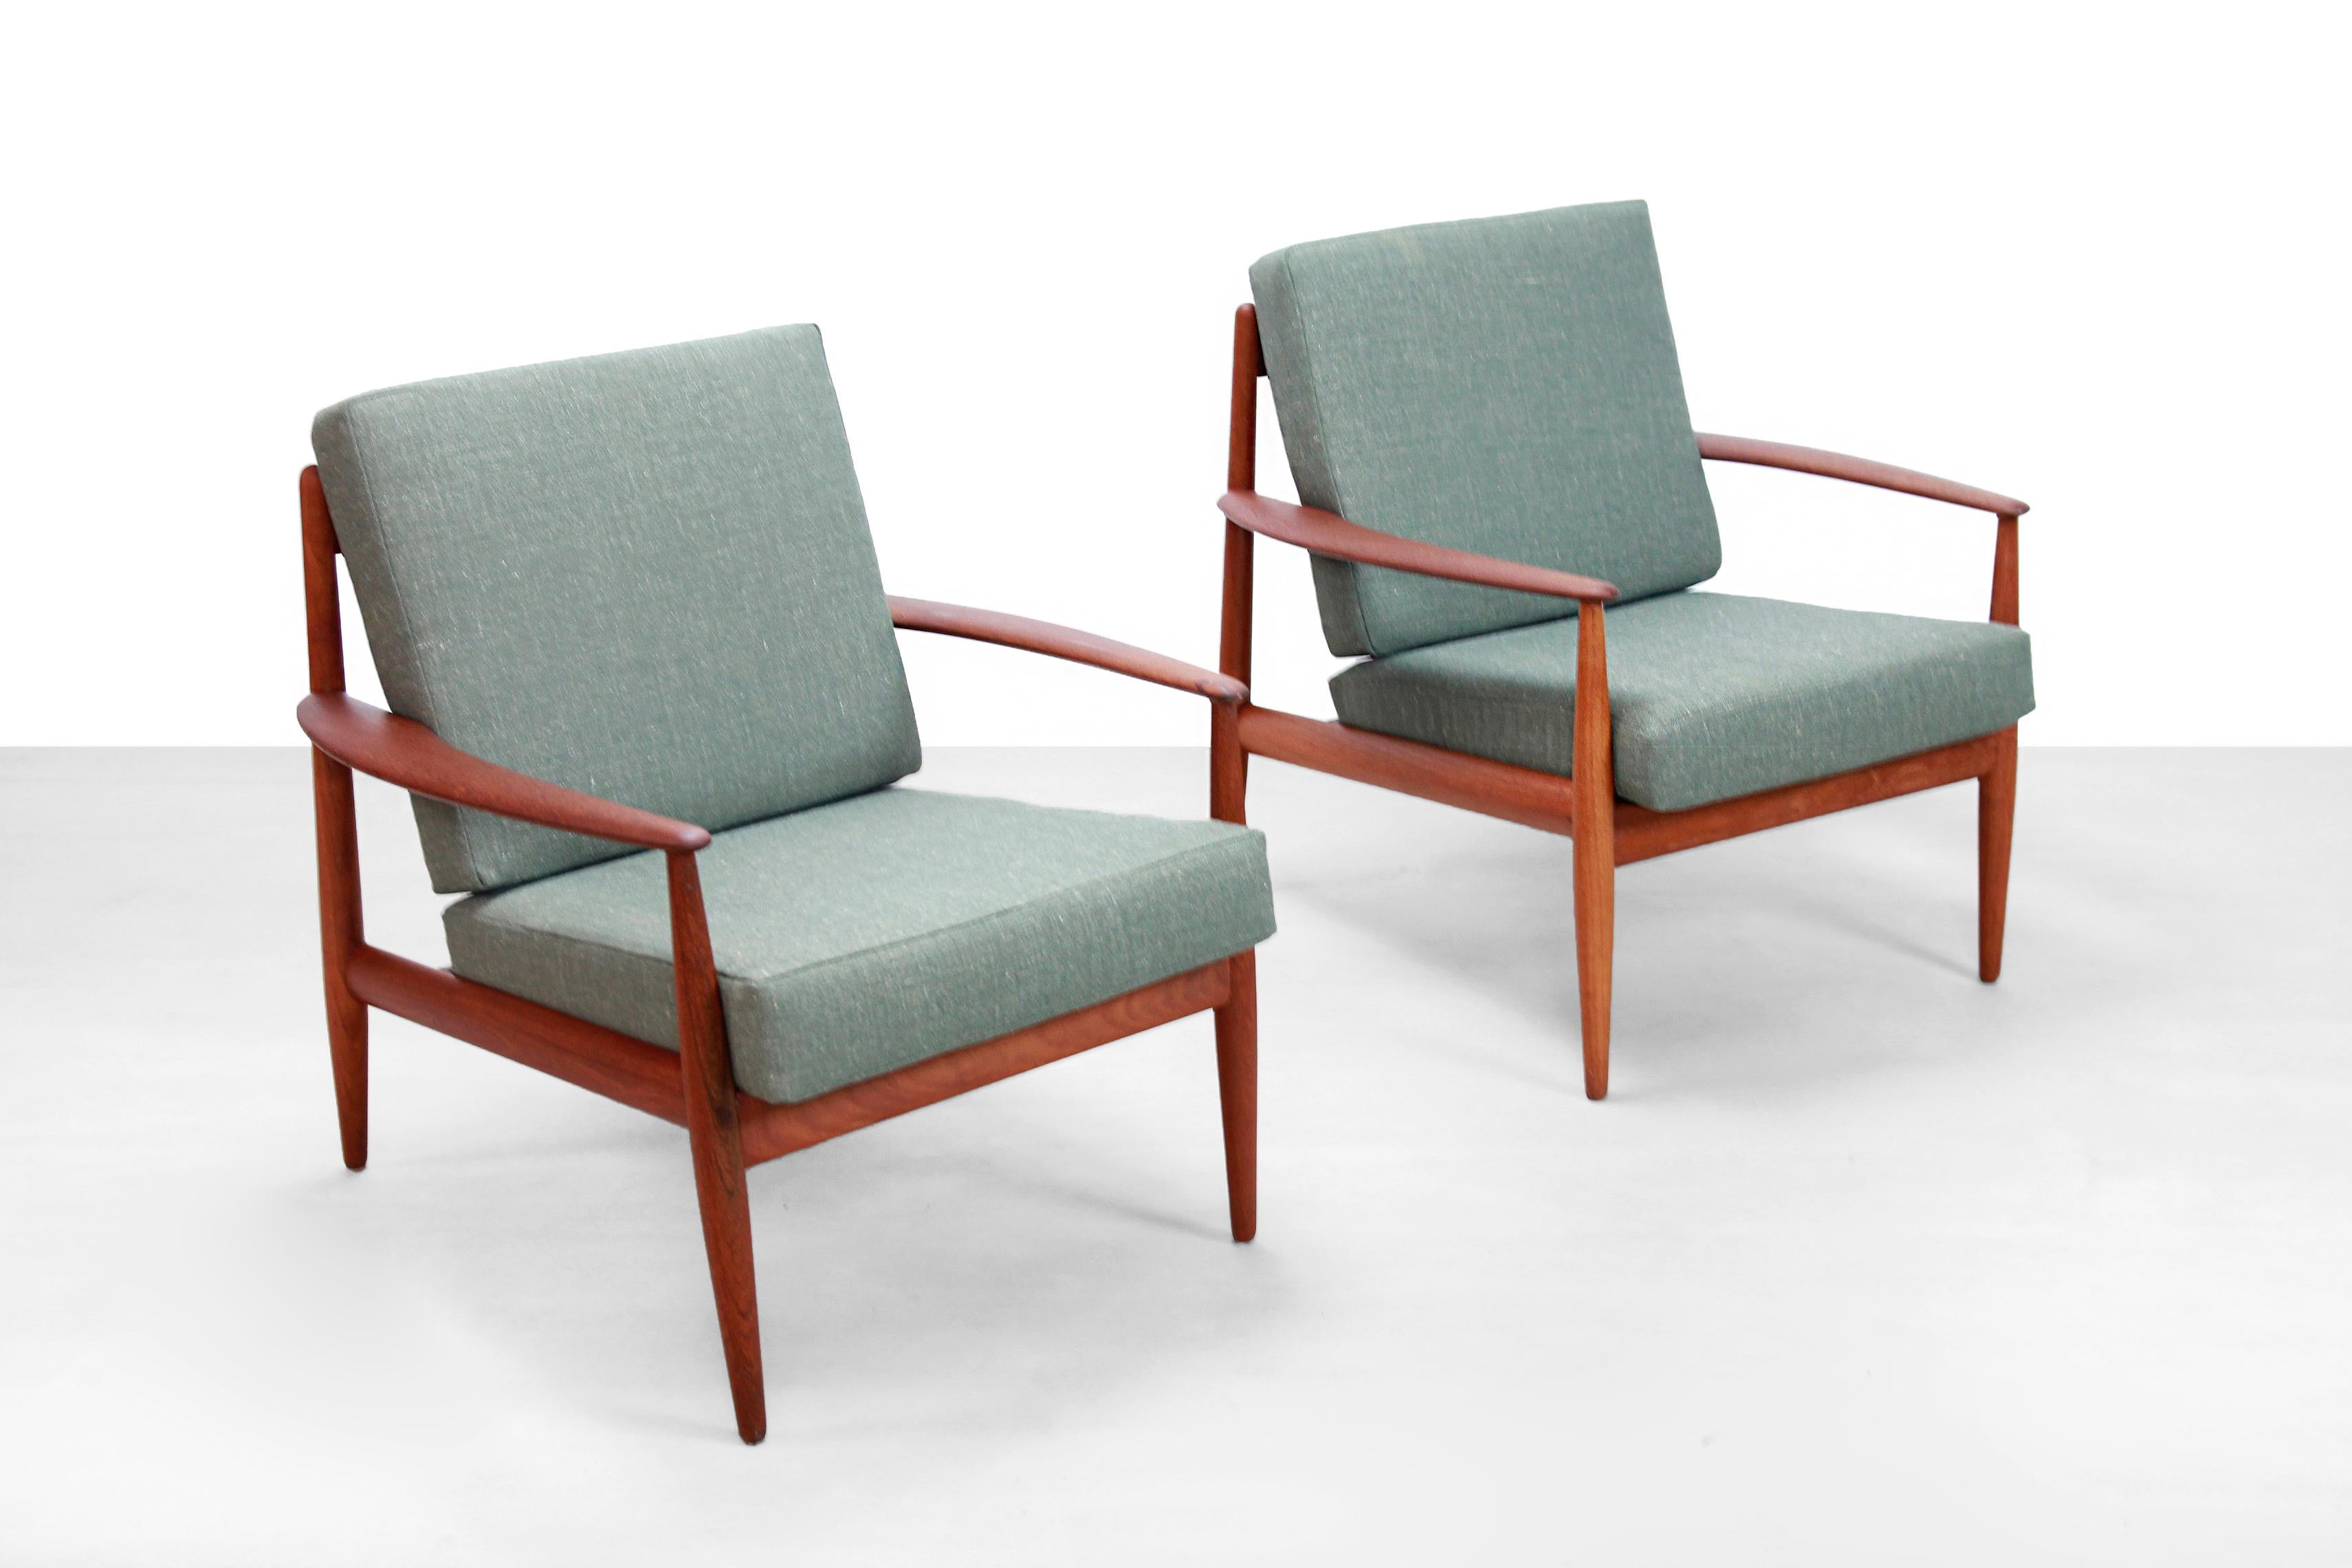 Beautiful set of vintage teak wooden model 118 lounge chairs. The armchairs are designed by Danish designer Grete Jalk and produced by France and Daverkosen. The chairs are marked with the old France and Daverkosen logo, which means that these